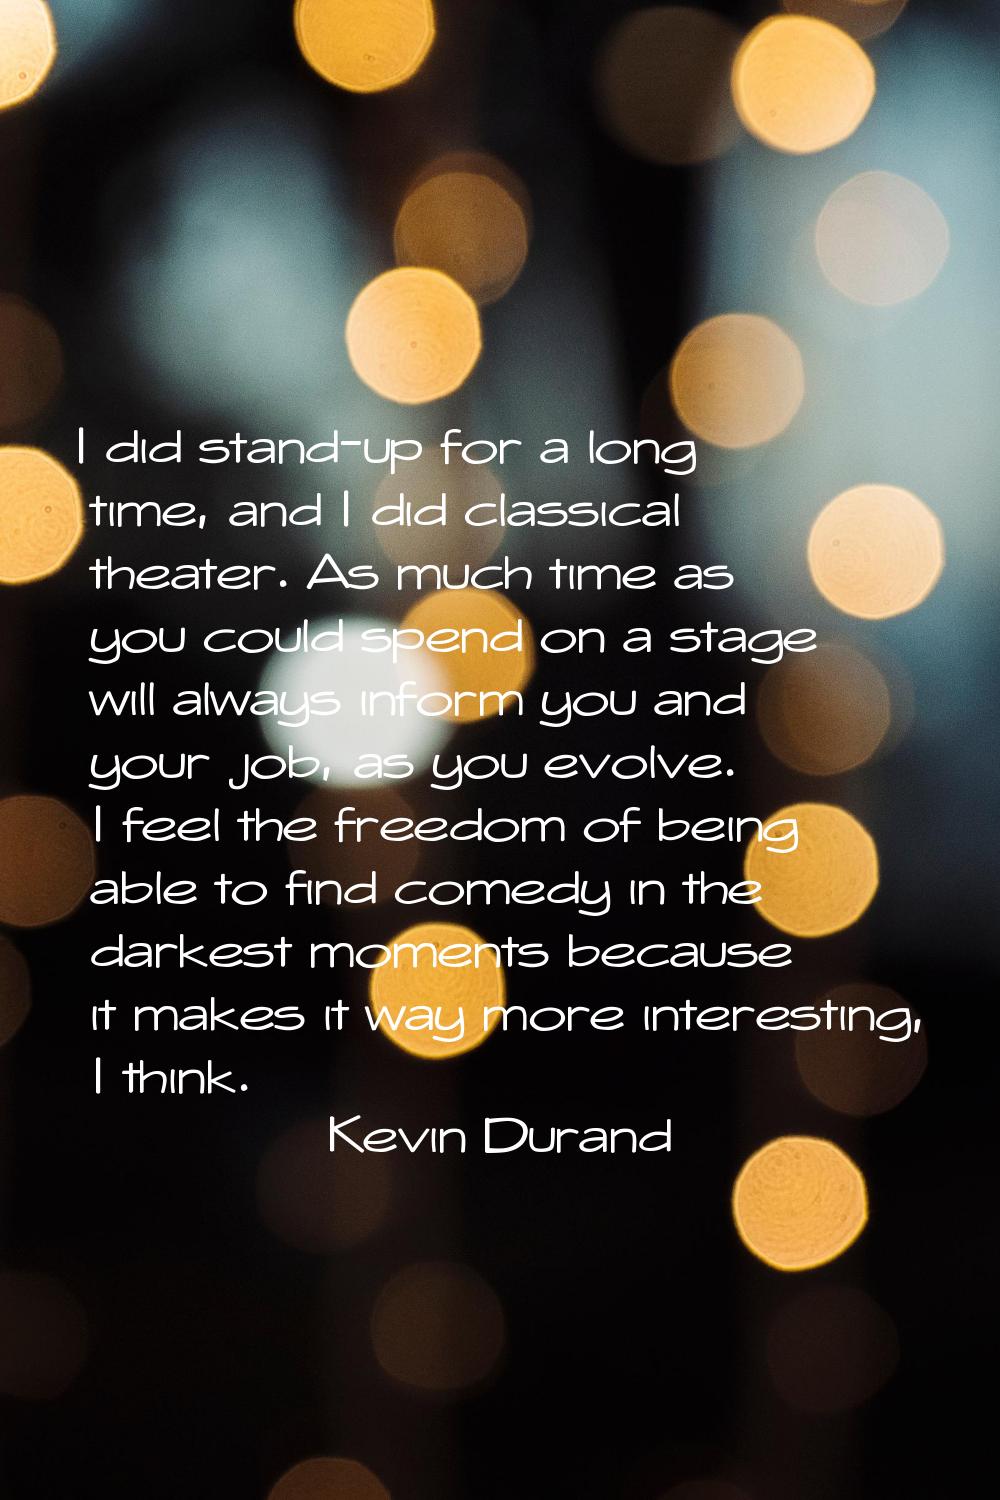 I did stand-up for a long time, and I did classical theater. As much time as you could spend on a s